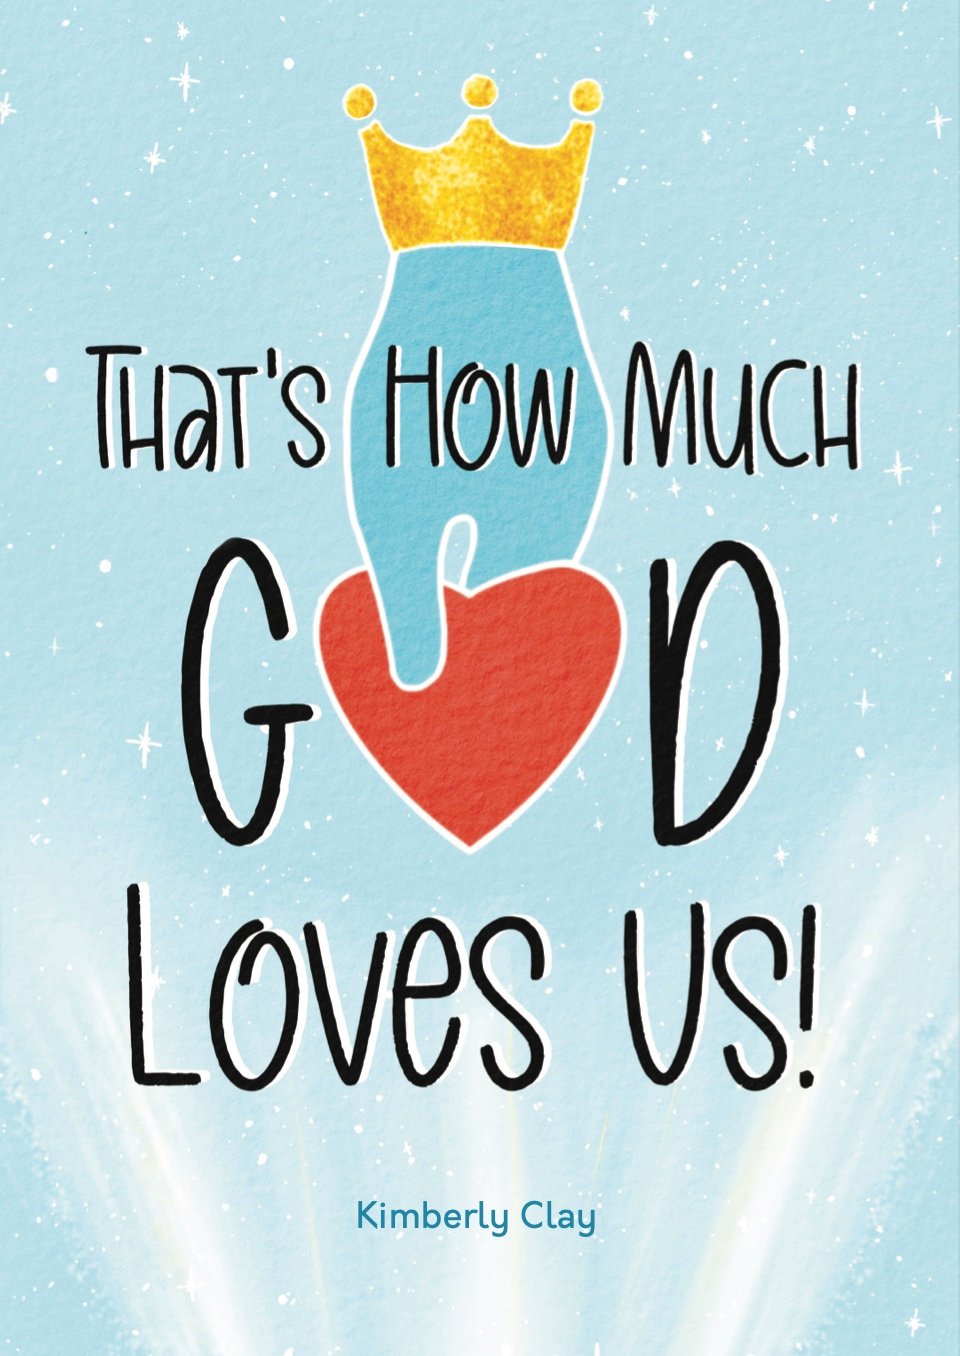 That's How Much God Loves Us!